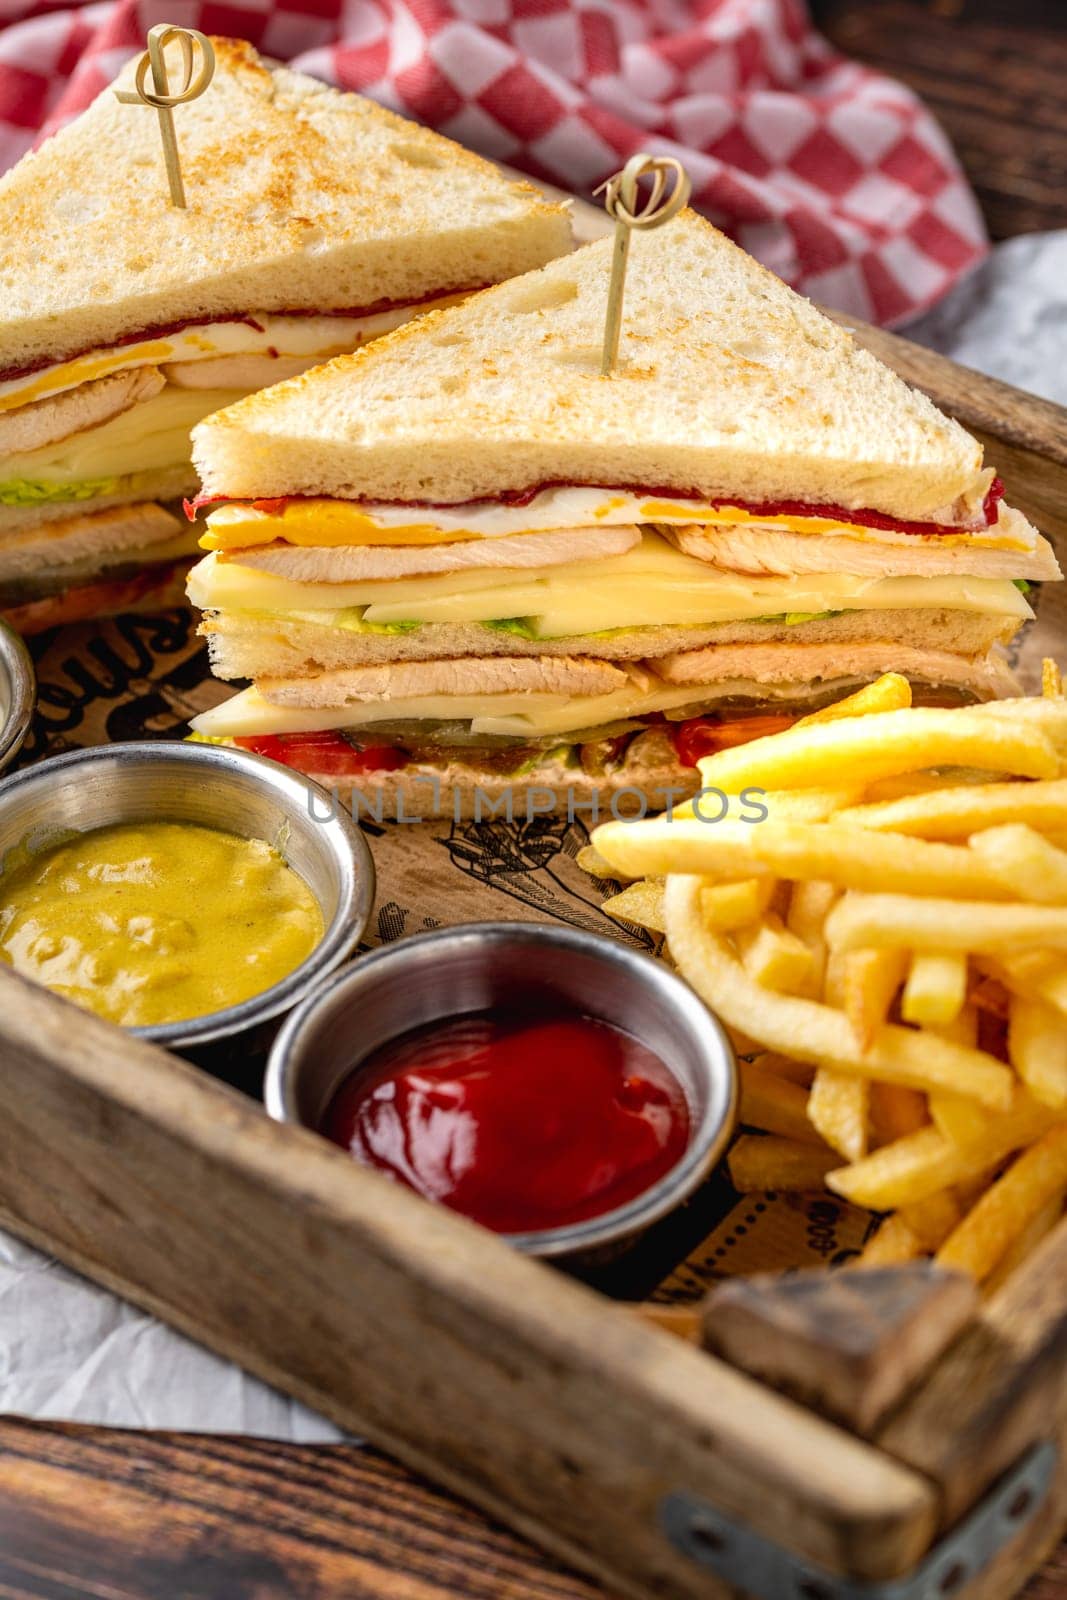 Chicken club sandwich with fries, ketchup, mustard and mayonnaise by Sonat